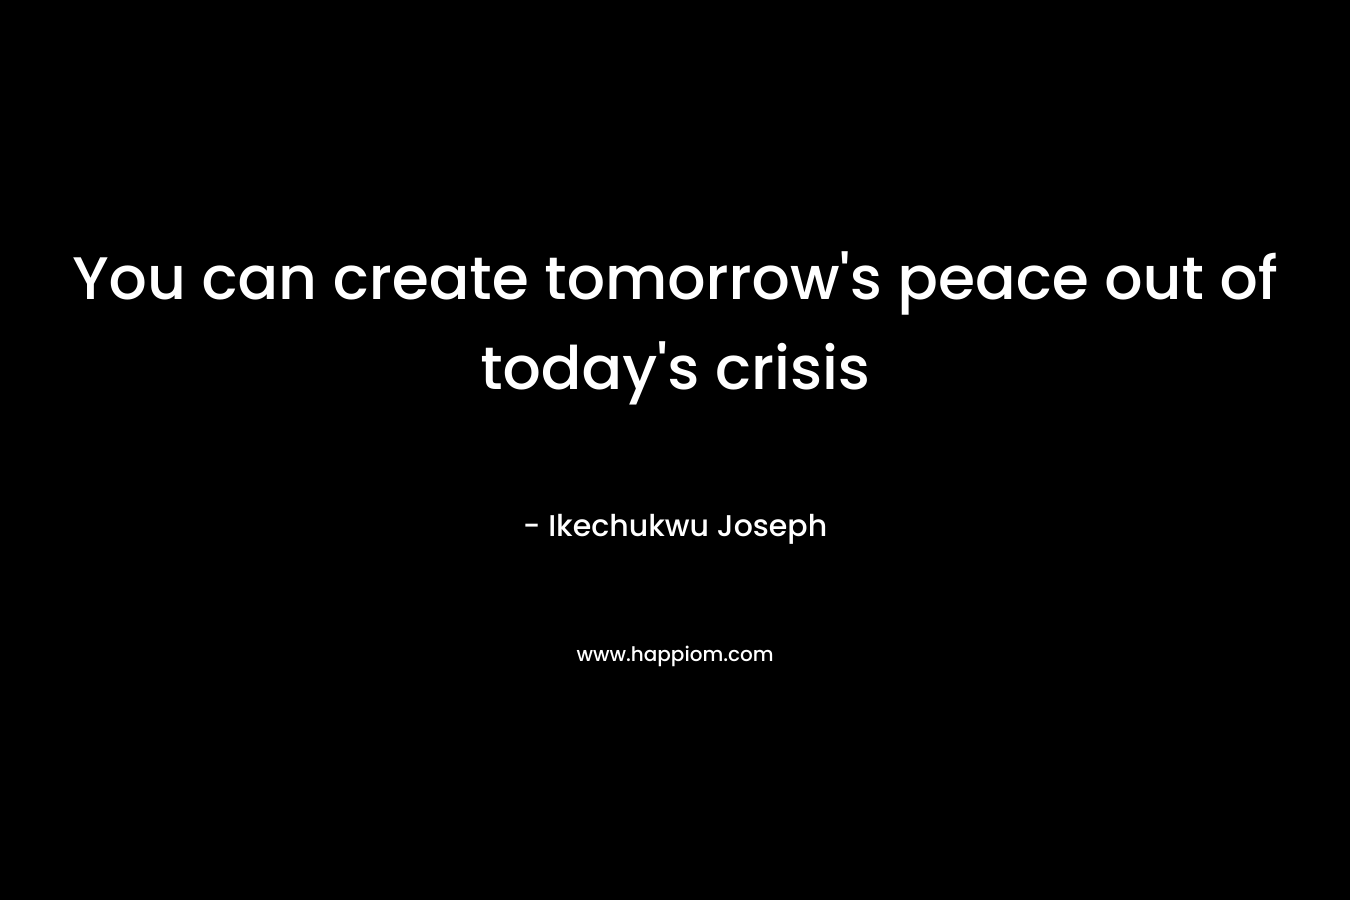 You can create tomorrow's peace out of today's crisis